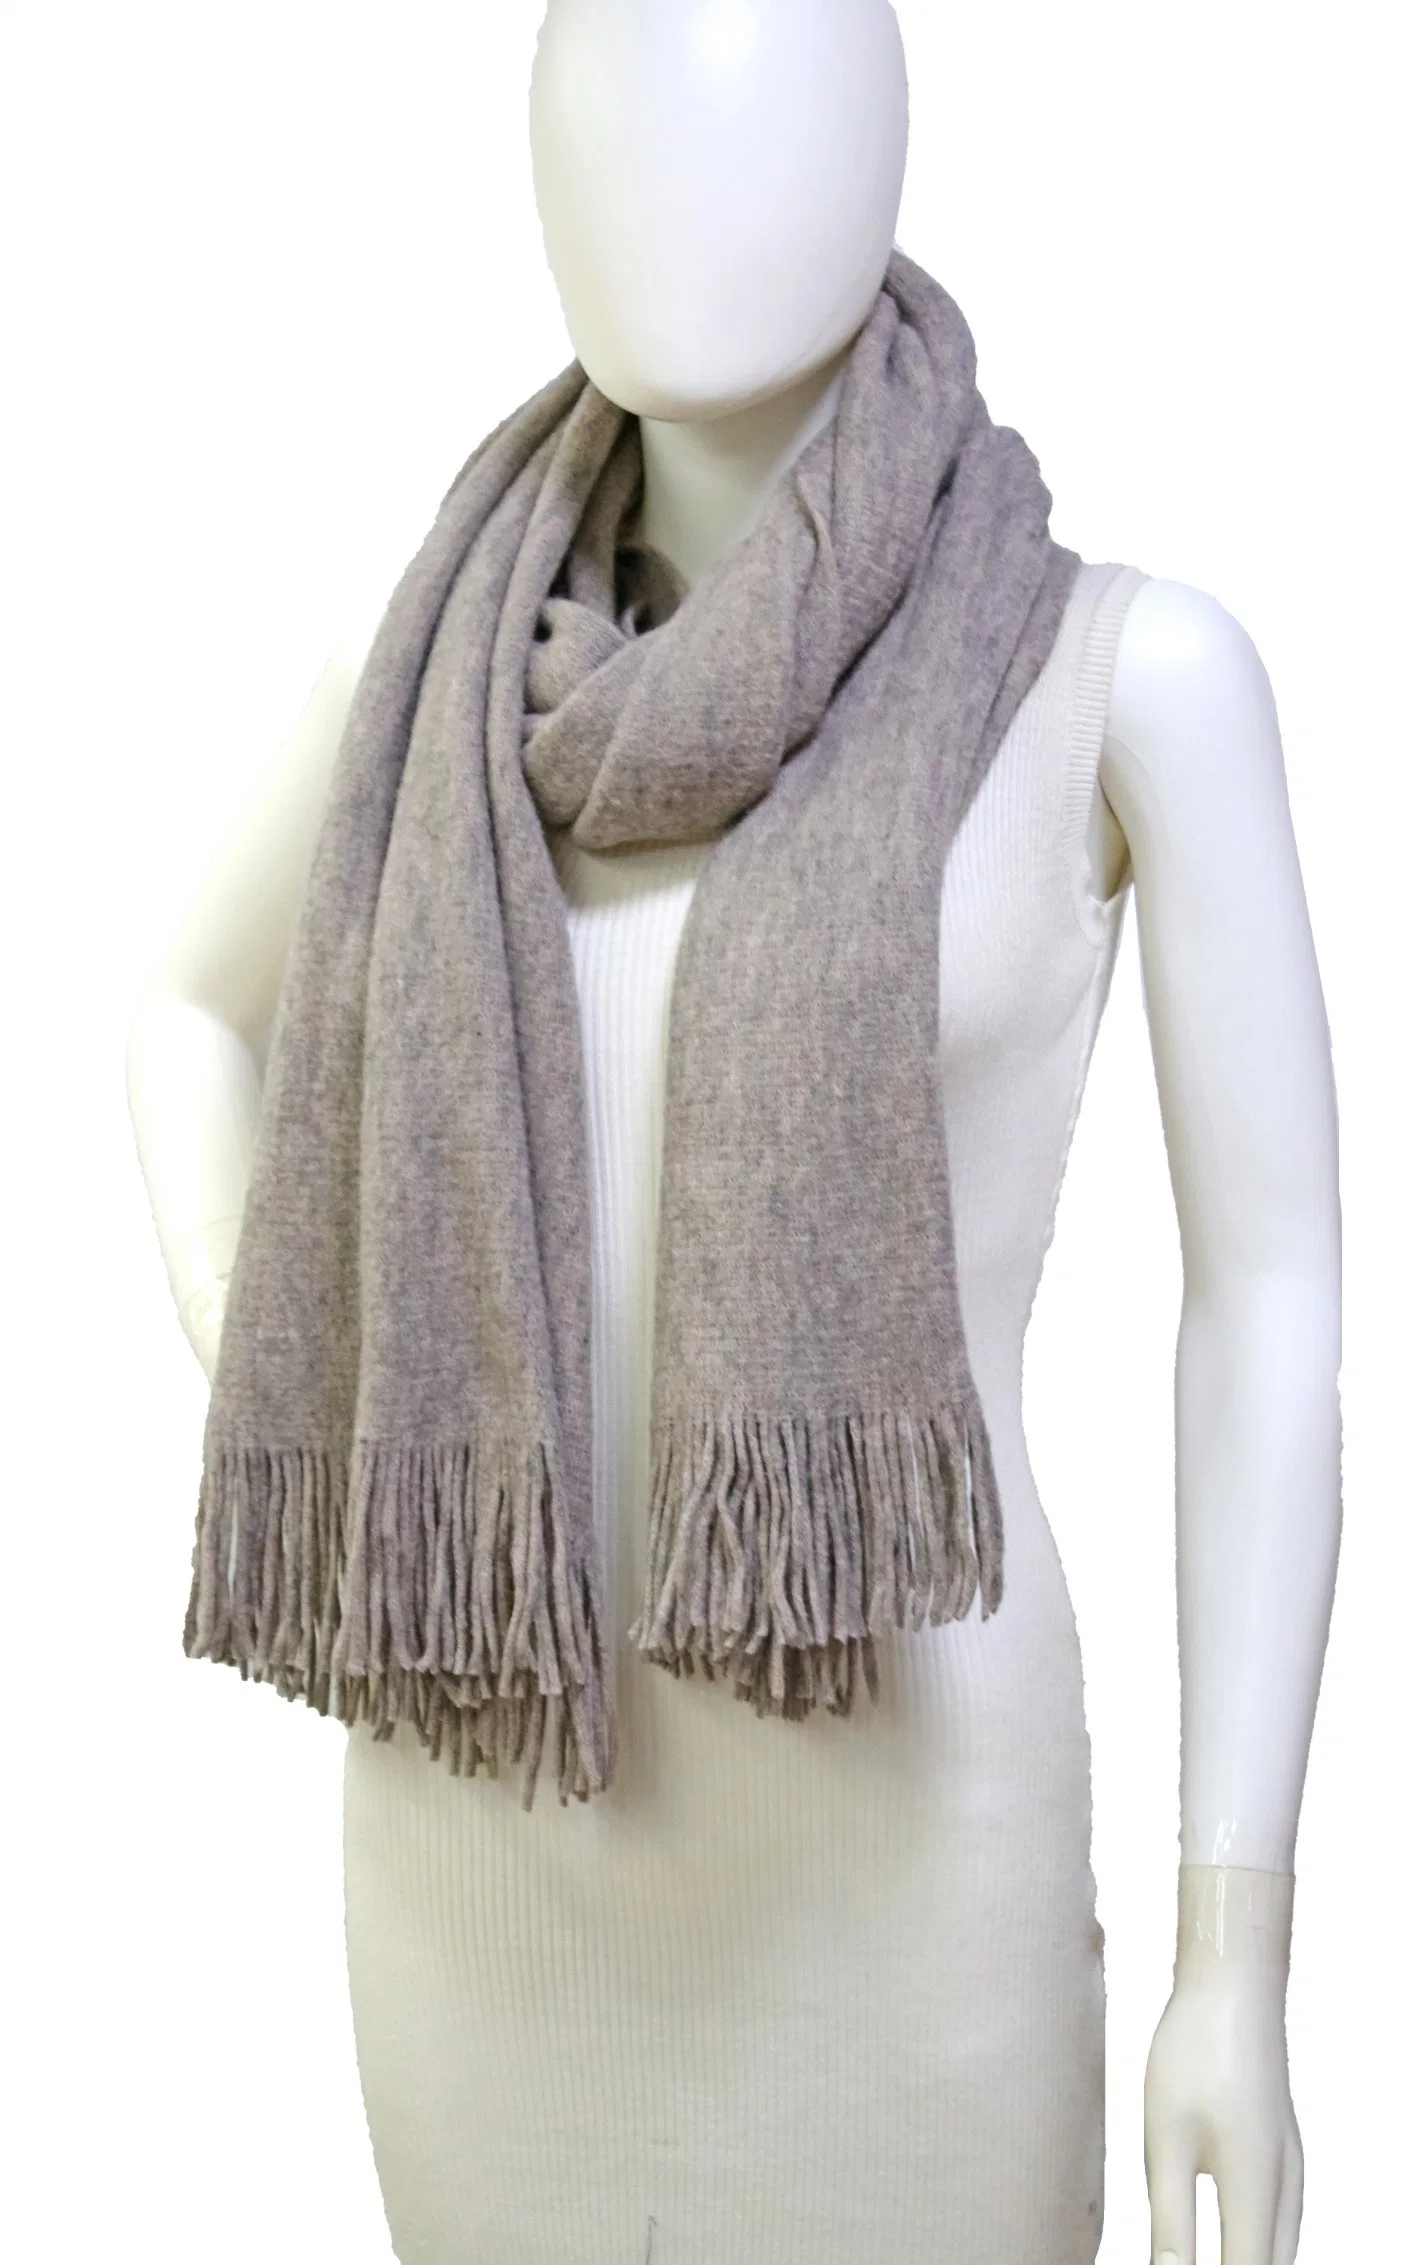 Very Soft Touch Woven Fur Scarf Scarves 2022 Women Warm Shawl